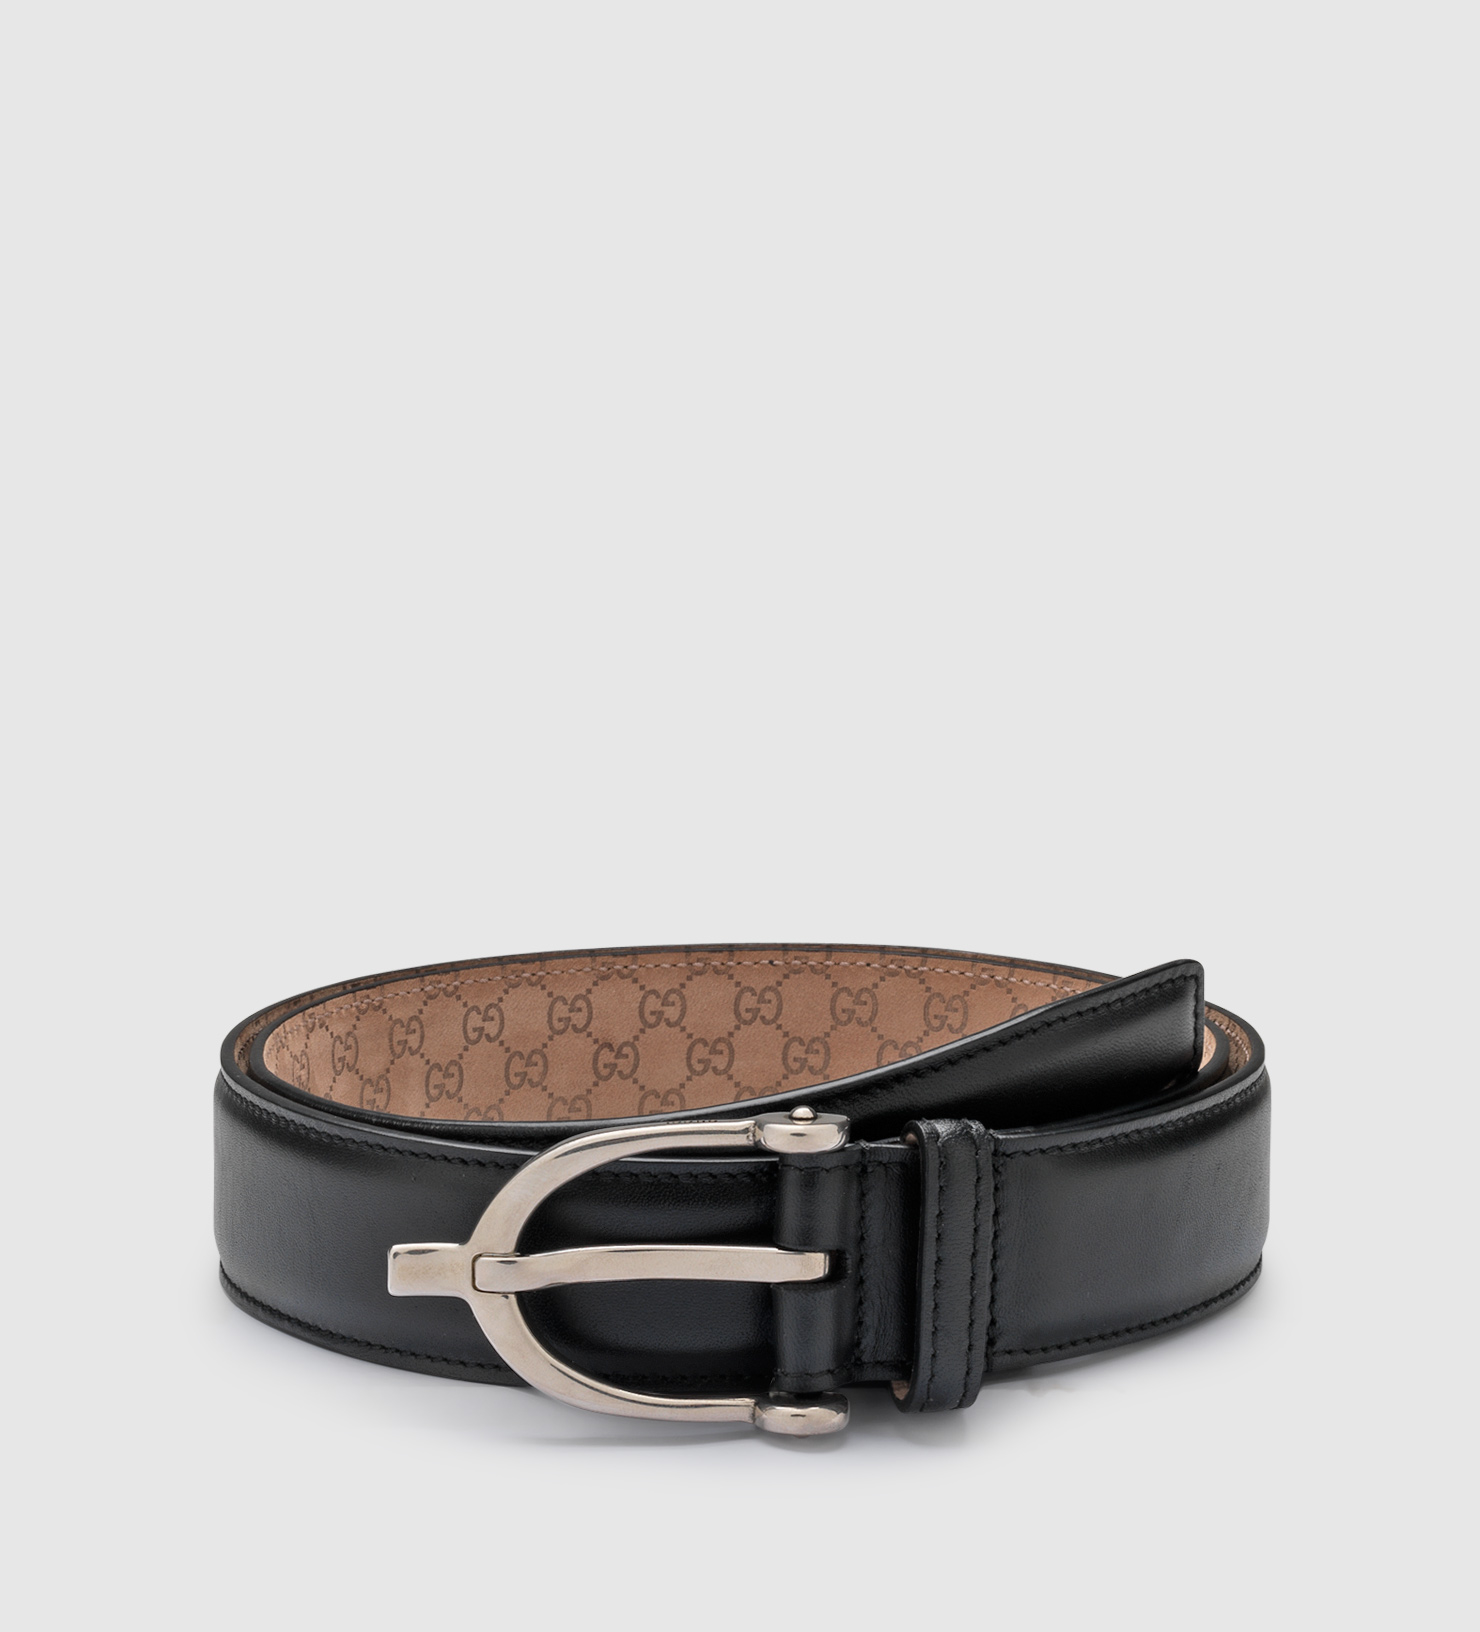 Lyst - Gucci Black Leather Belt With Spur Buckle in Black for Men